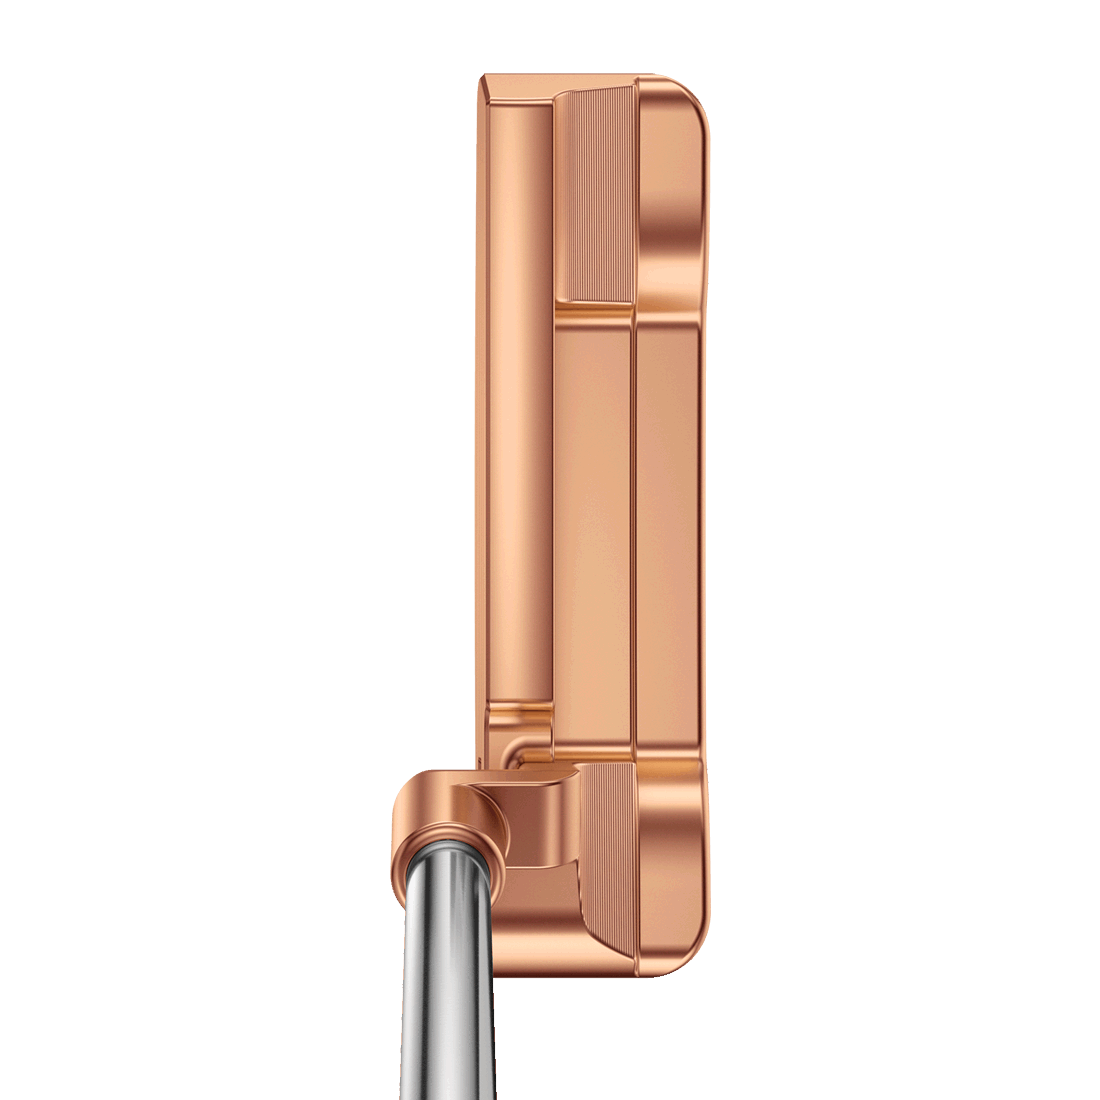 address view of PLD Limited Anser Patent 55 putter in copper with natural finish